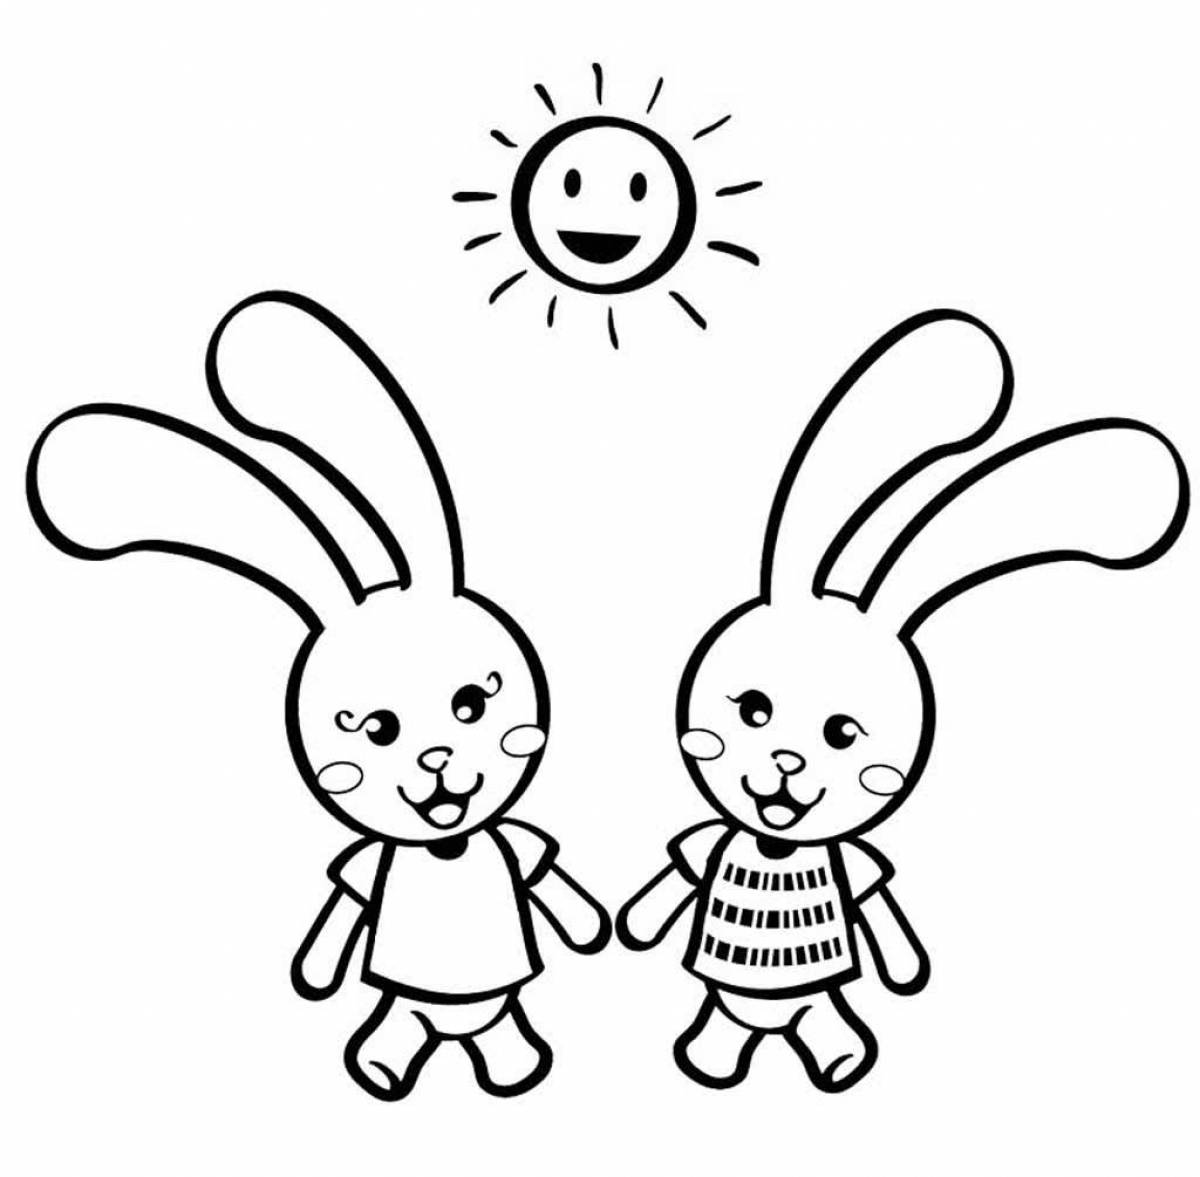 Bright coloring game with bunny